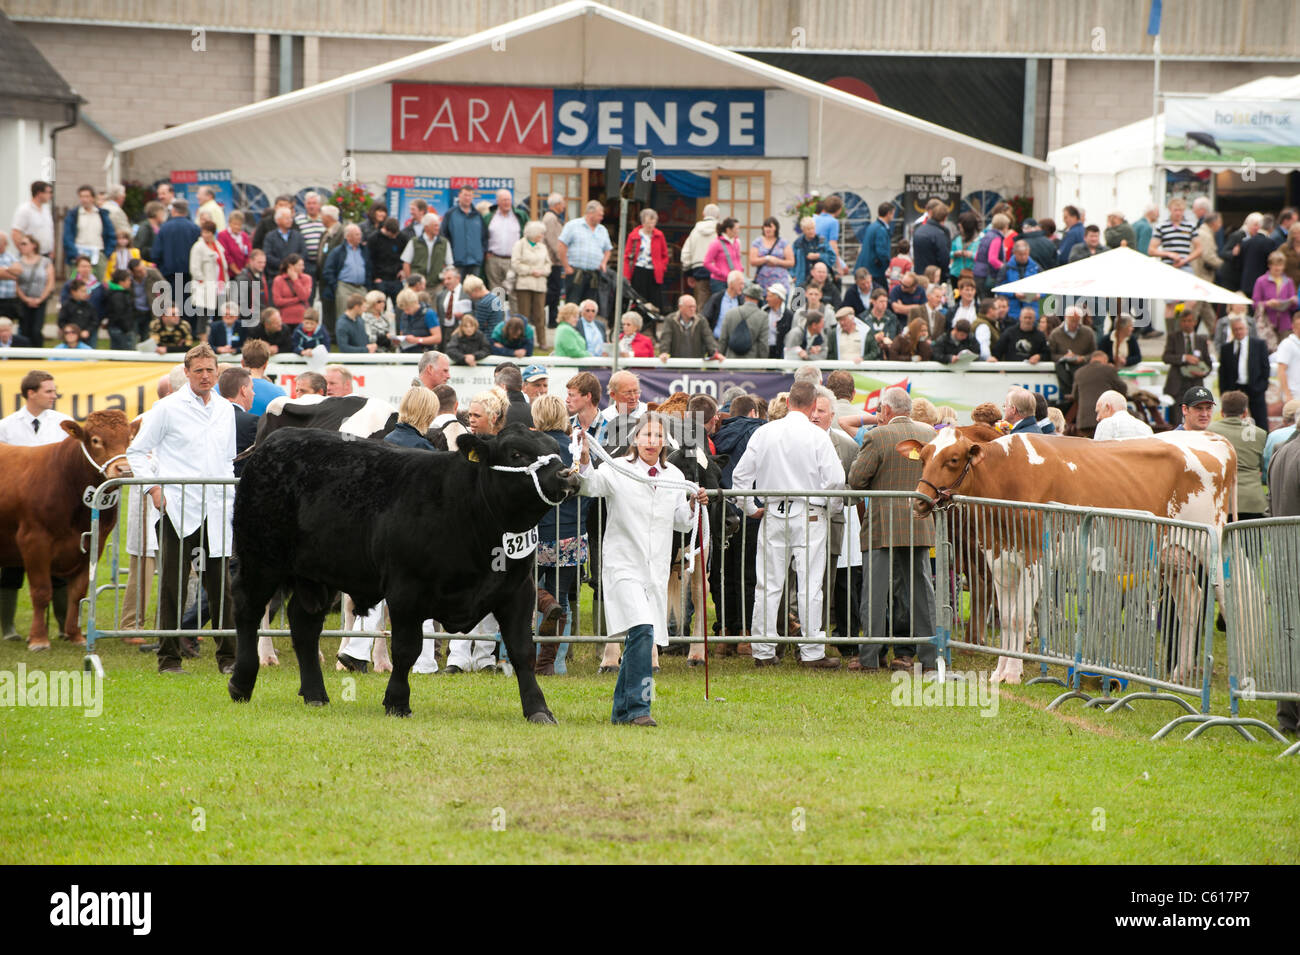 Bulls being shown in competition at the Royal Welsh Agricultural Show, Builth Wells, Wales, 2011 Stock Photo